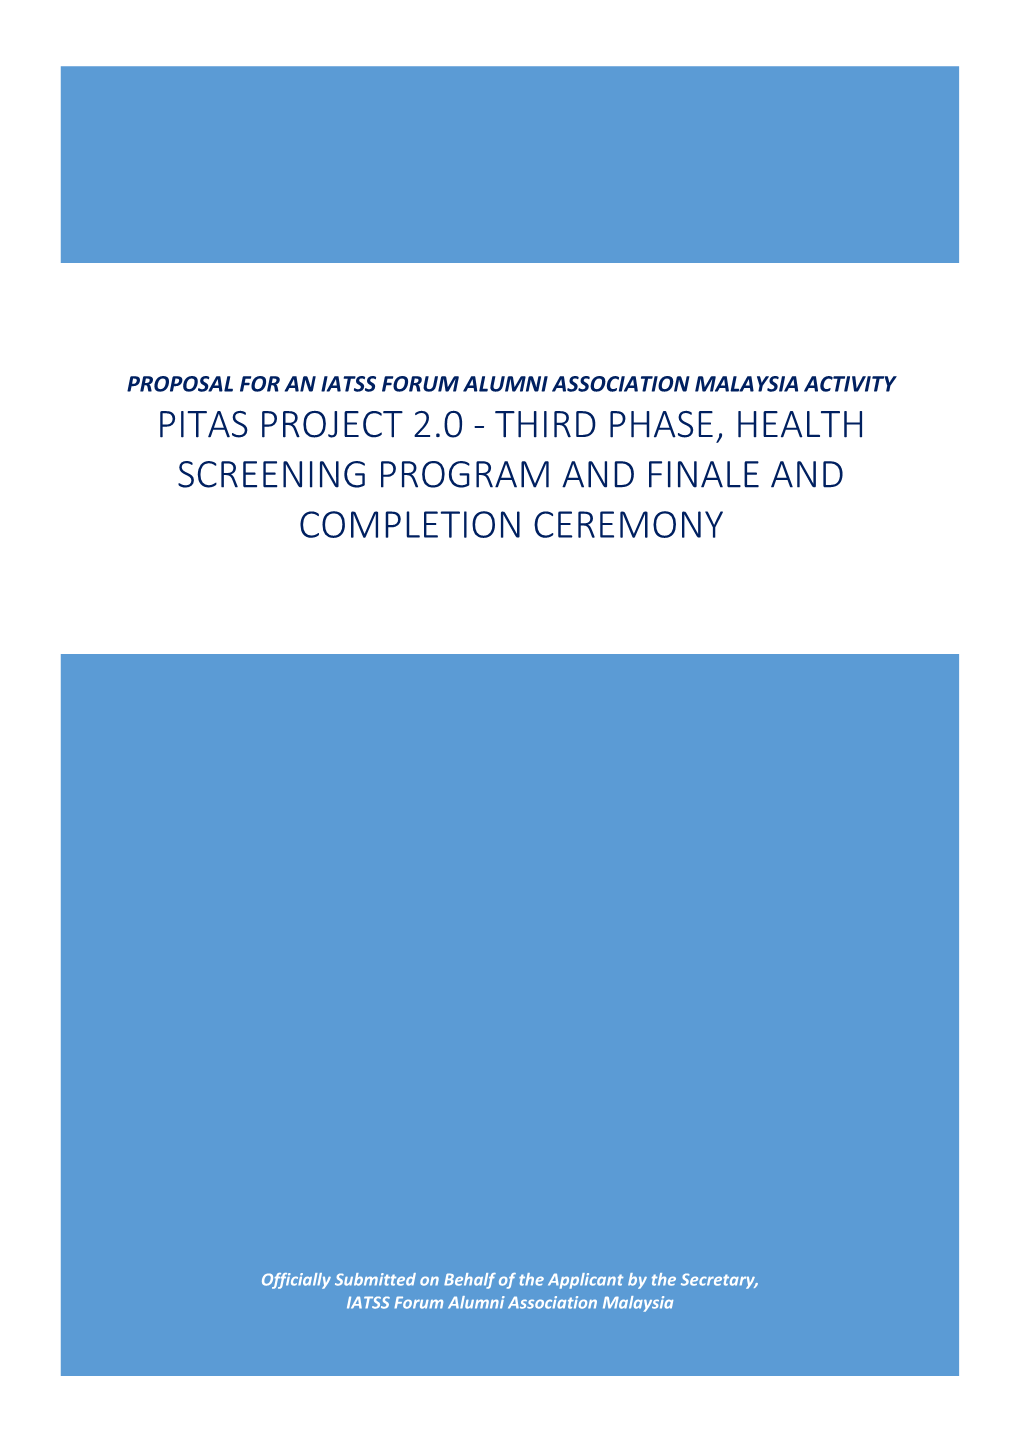 Pitas Project 2.0 - Third Phase, Health Screening Program and Finale and Completion Ceremony